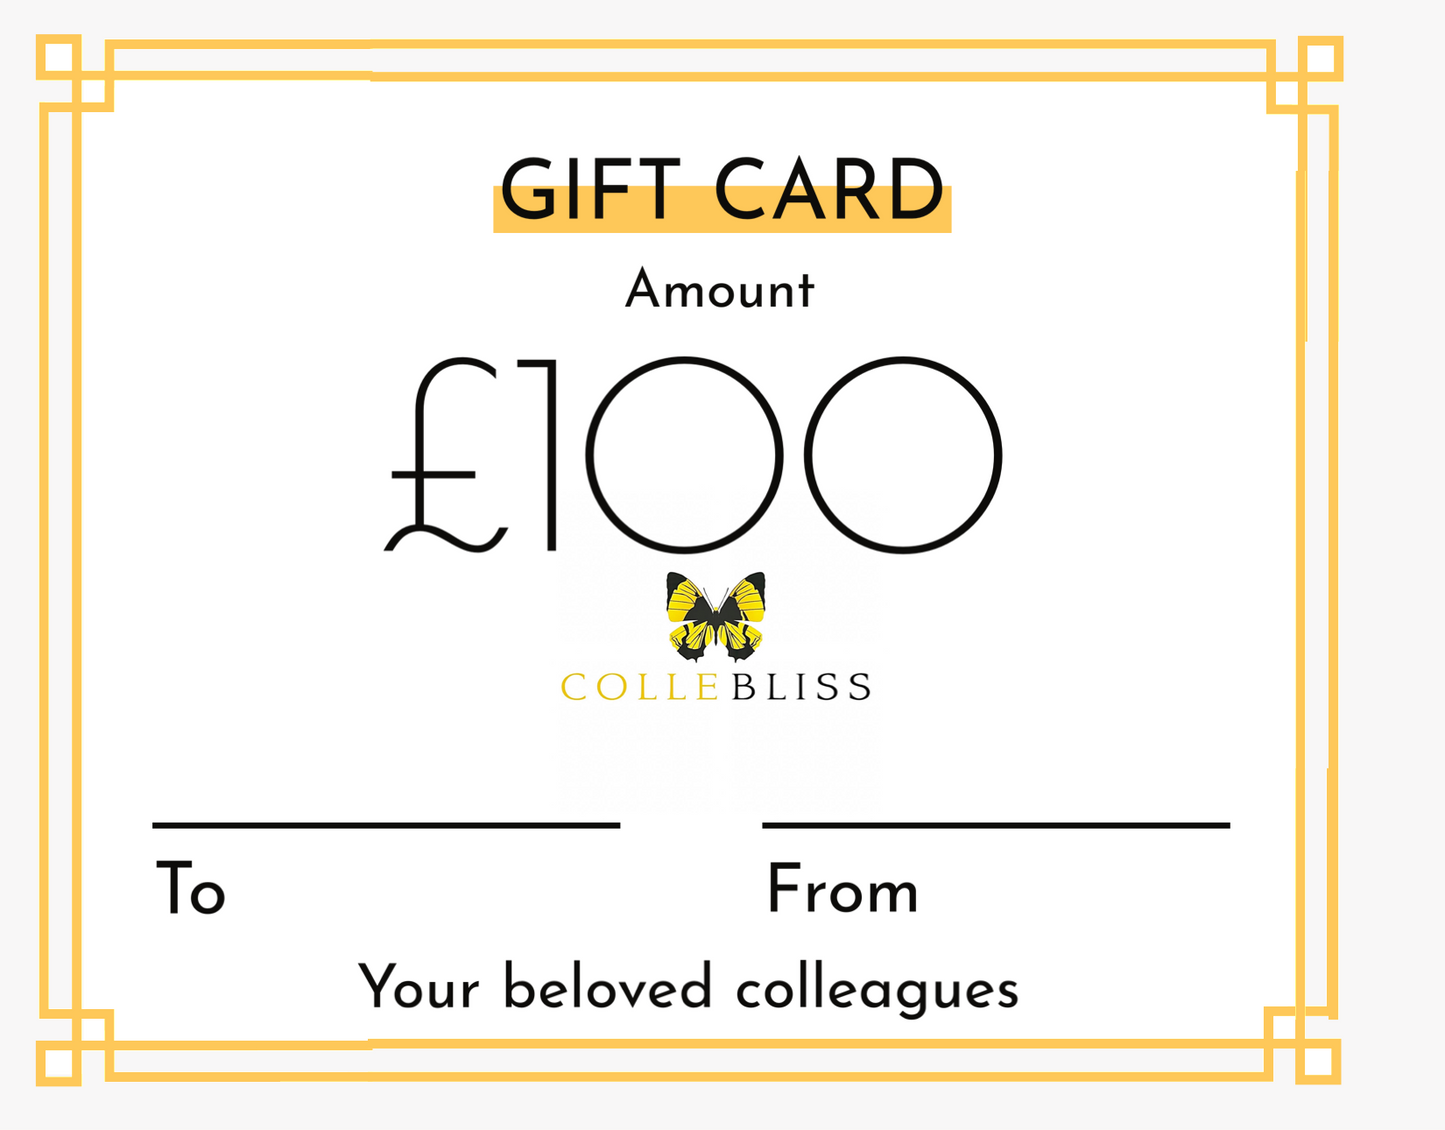 Gift Card for Colleagues